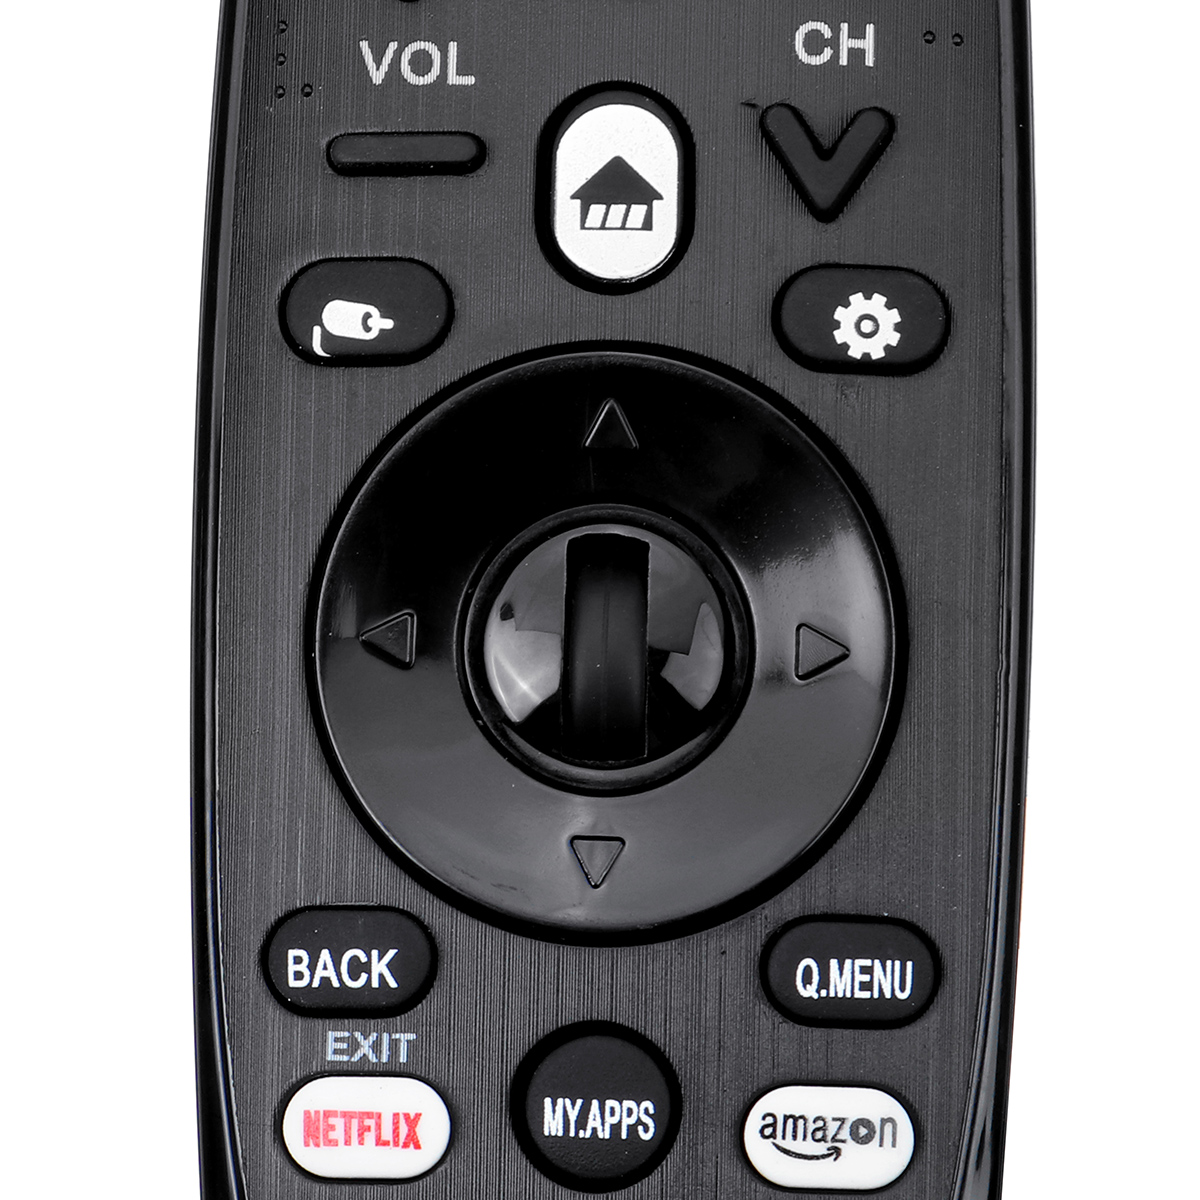 Universal-Infrared-Remote-Control-for-LG-Smart-TV-AN-MR18BA-AKB75375501-AN-MR19-AN-MR600-1937990-7